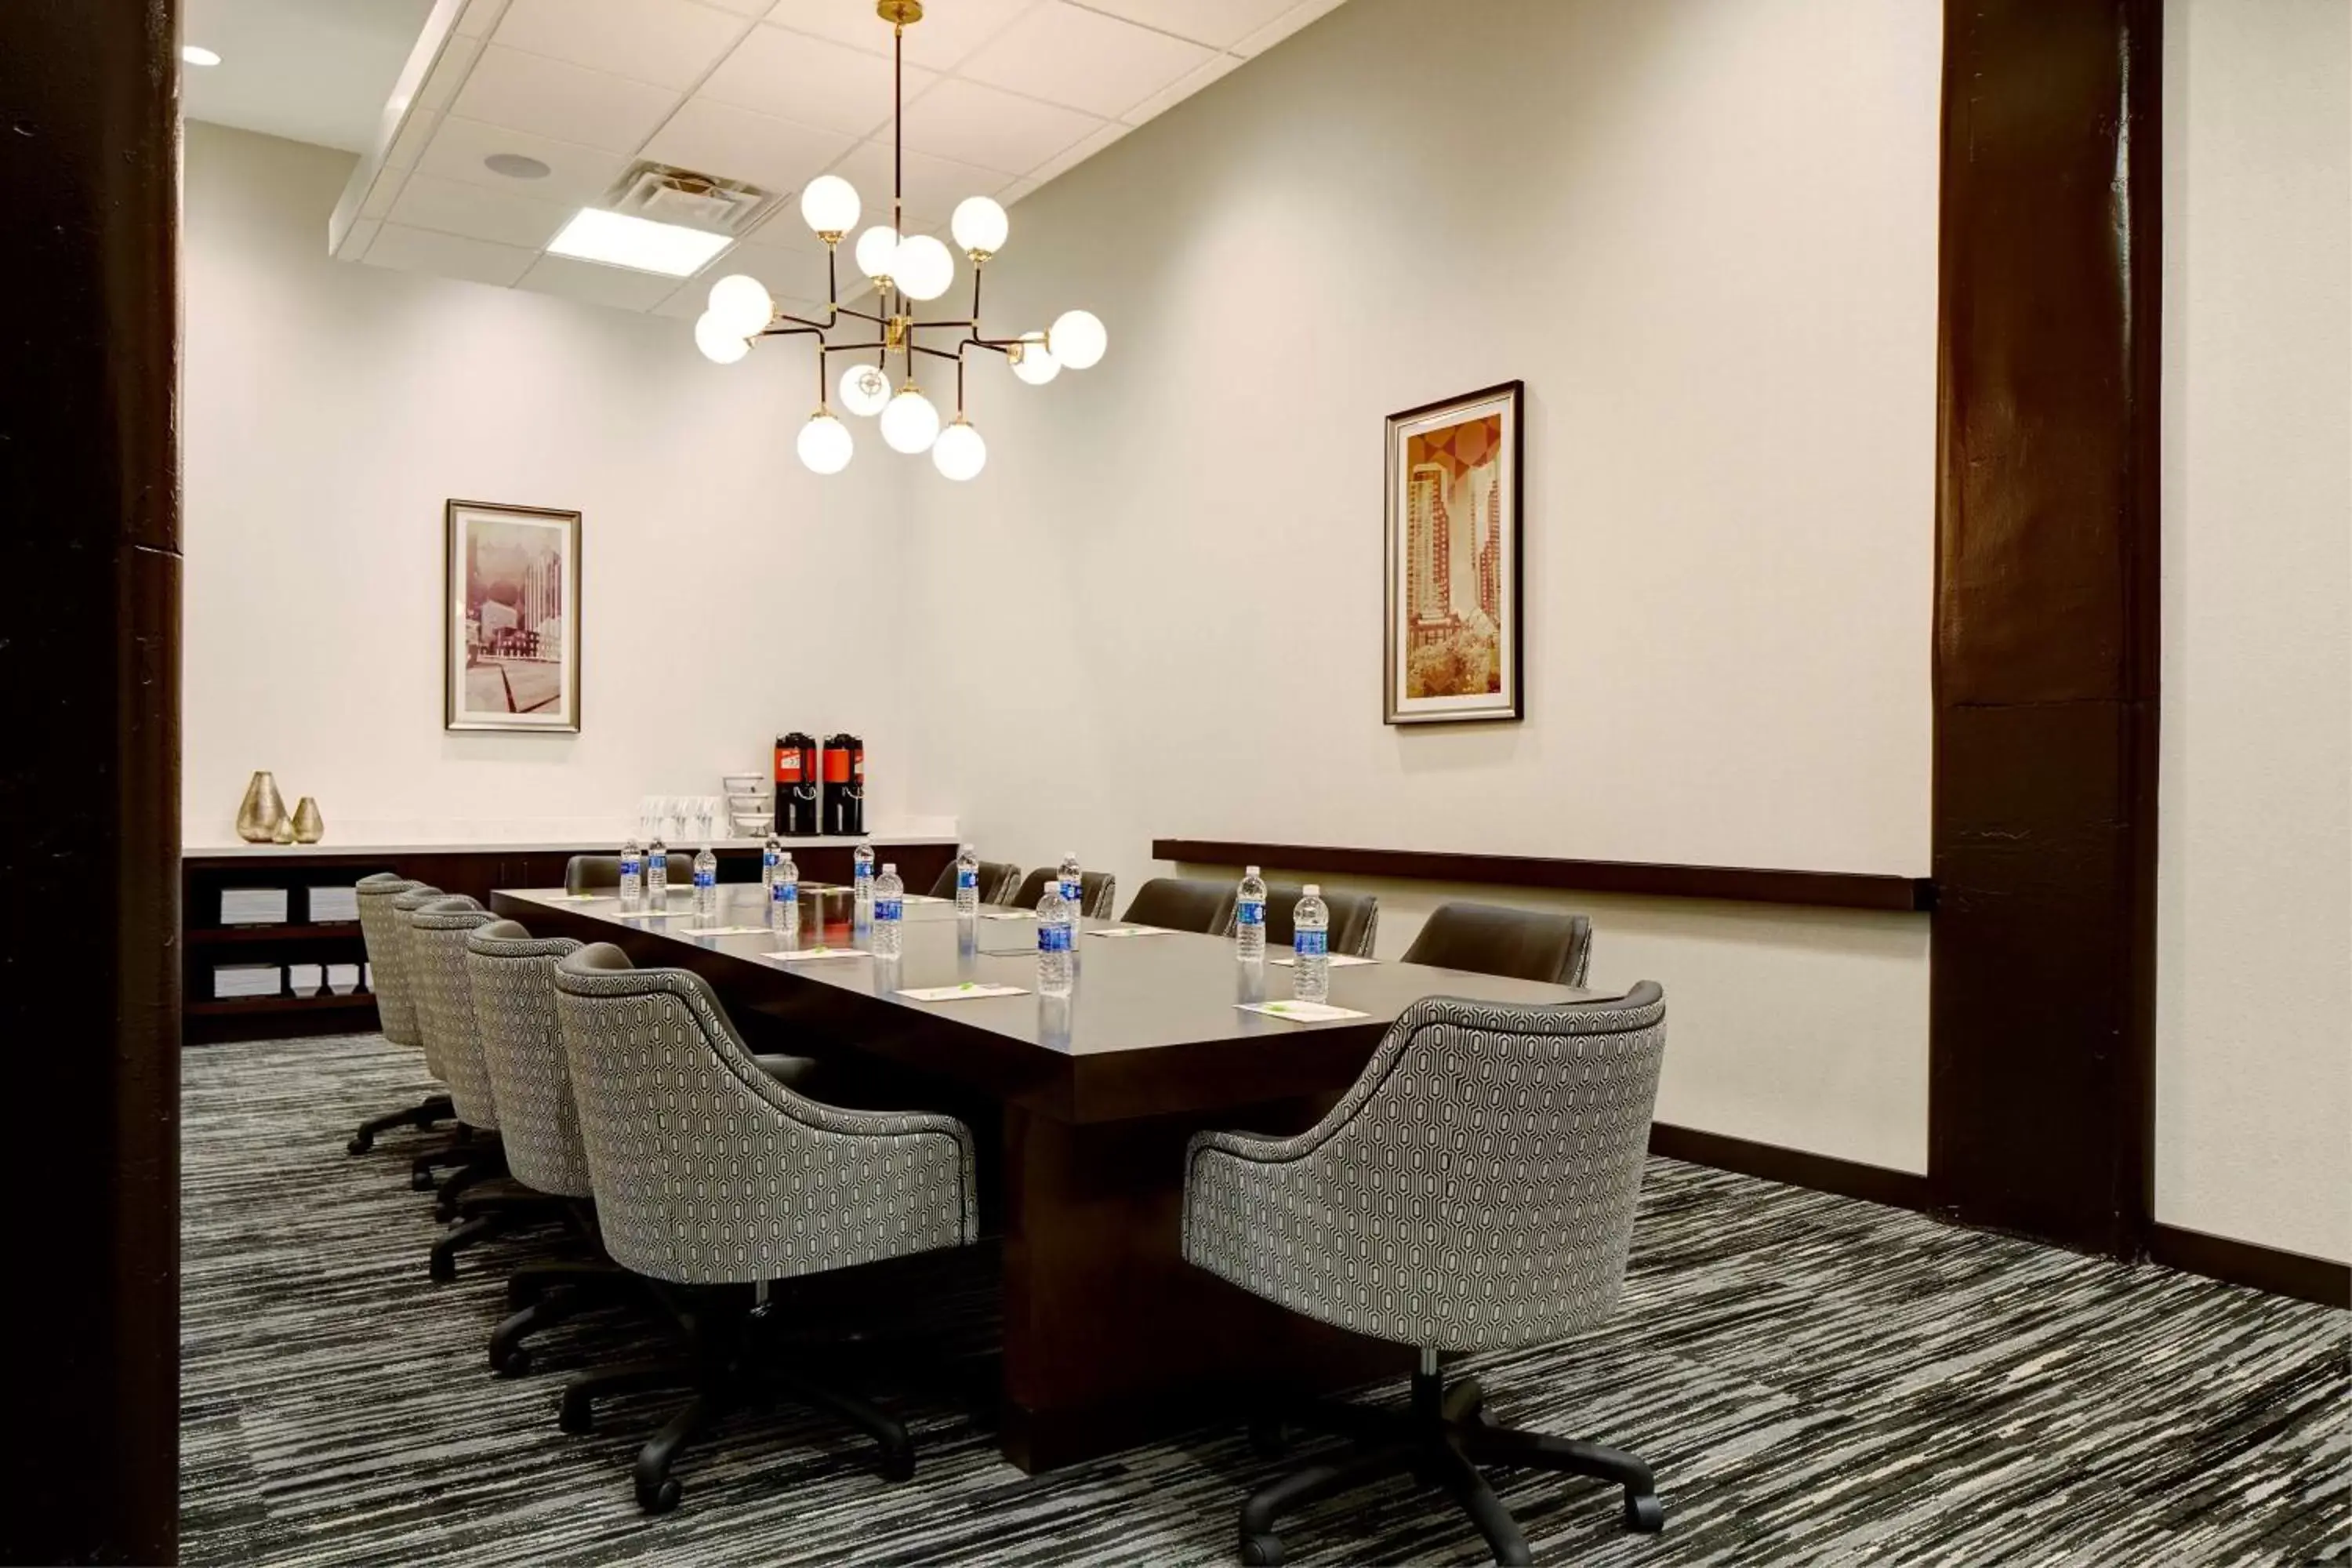 Meeting/conference room in Hyatt Place St. Paul